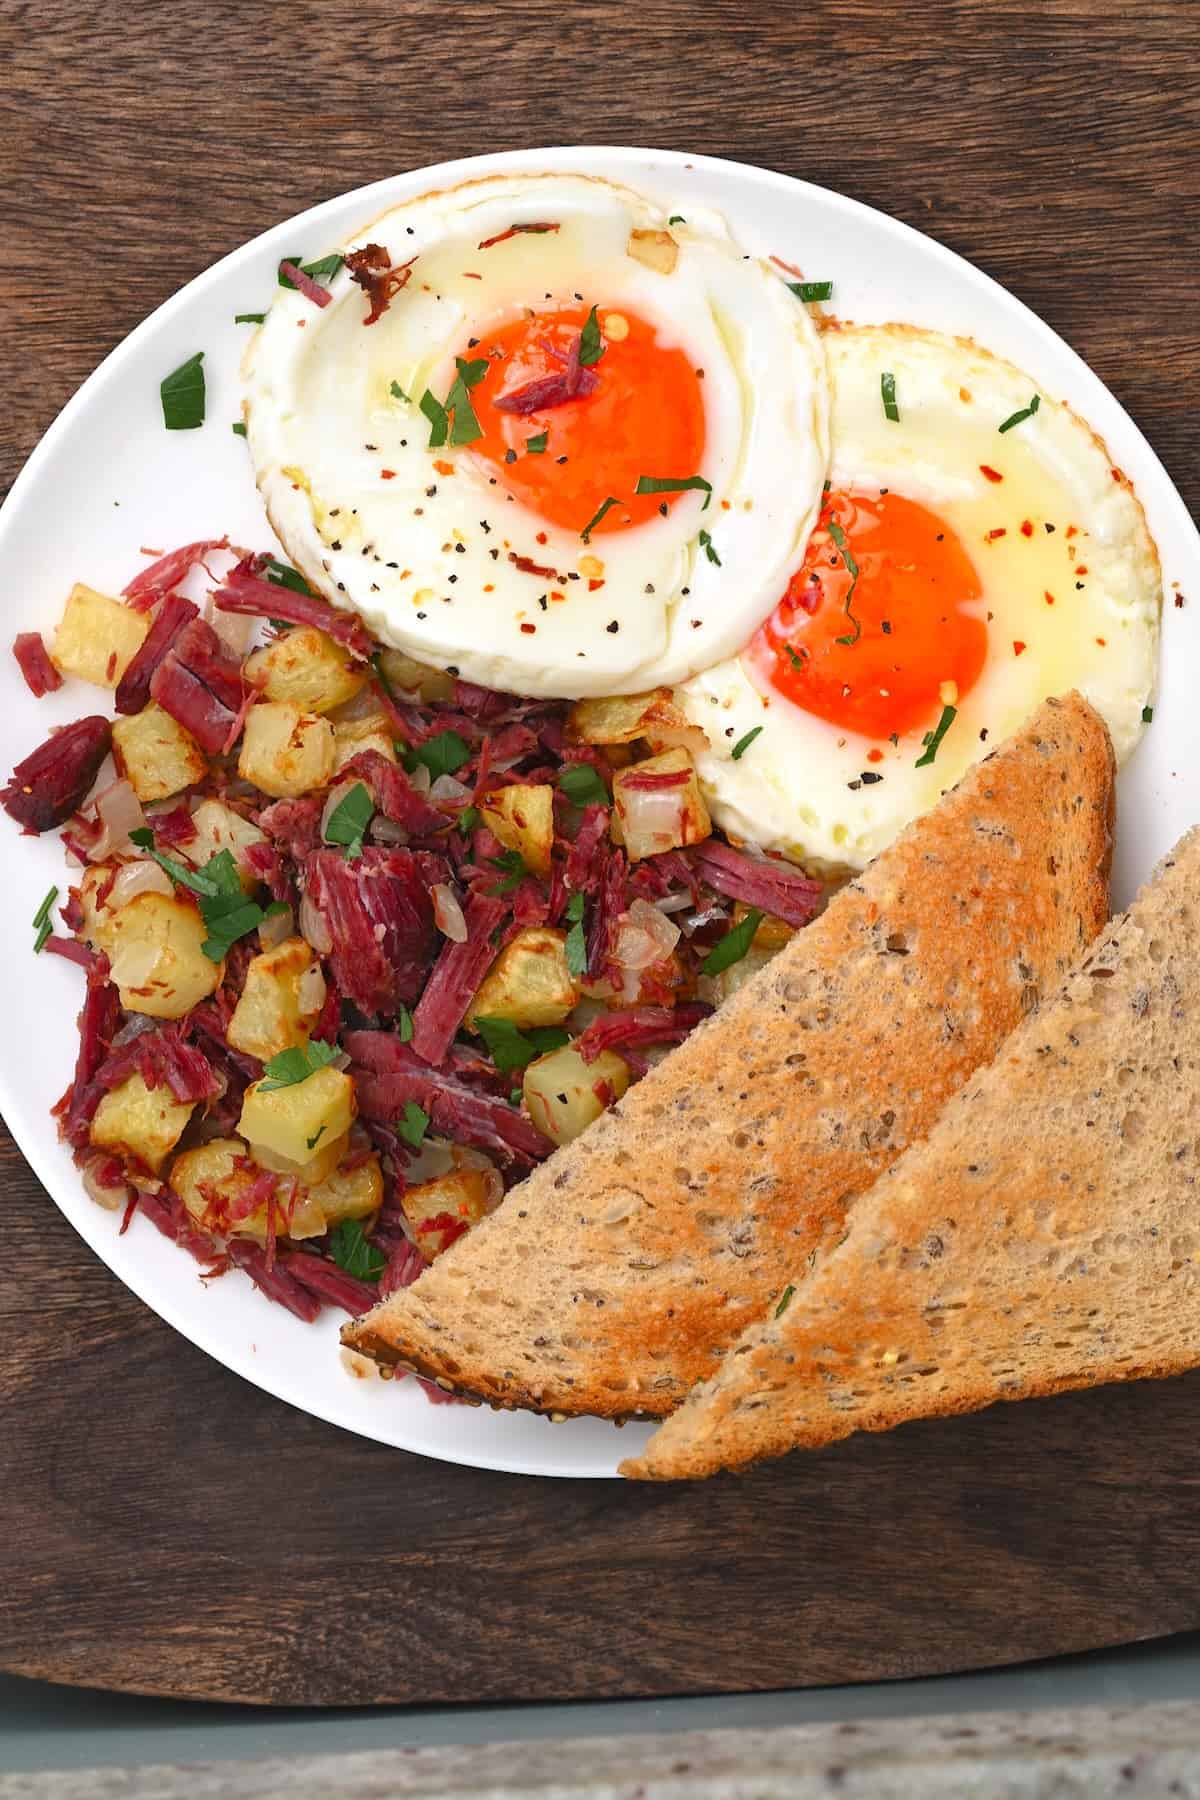 A serving of corned beef hash with fried eggs and bread